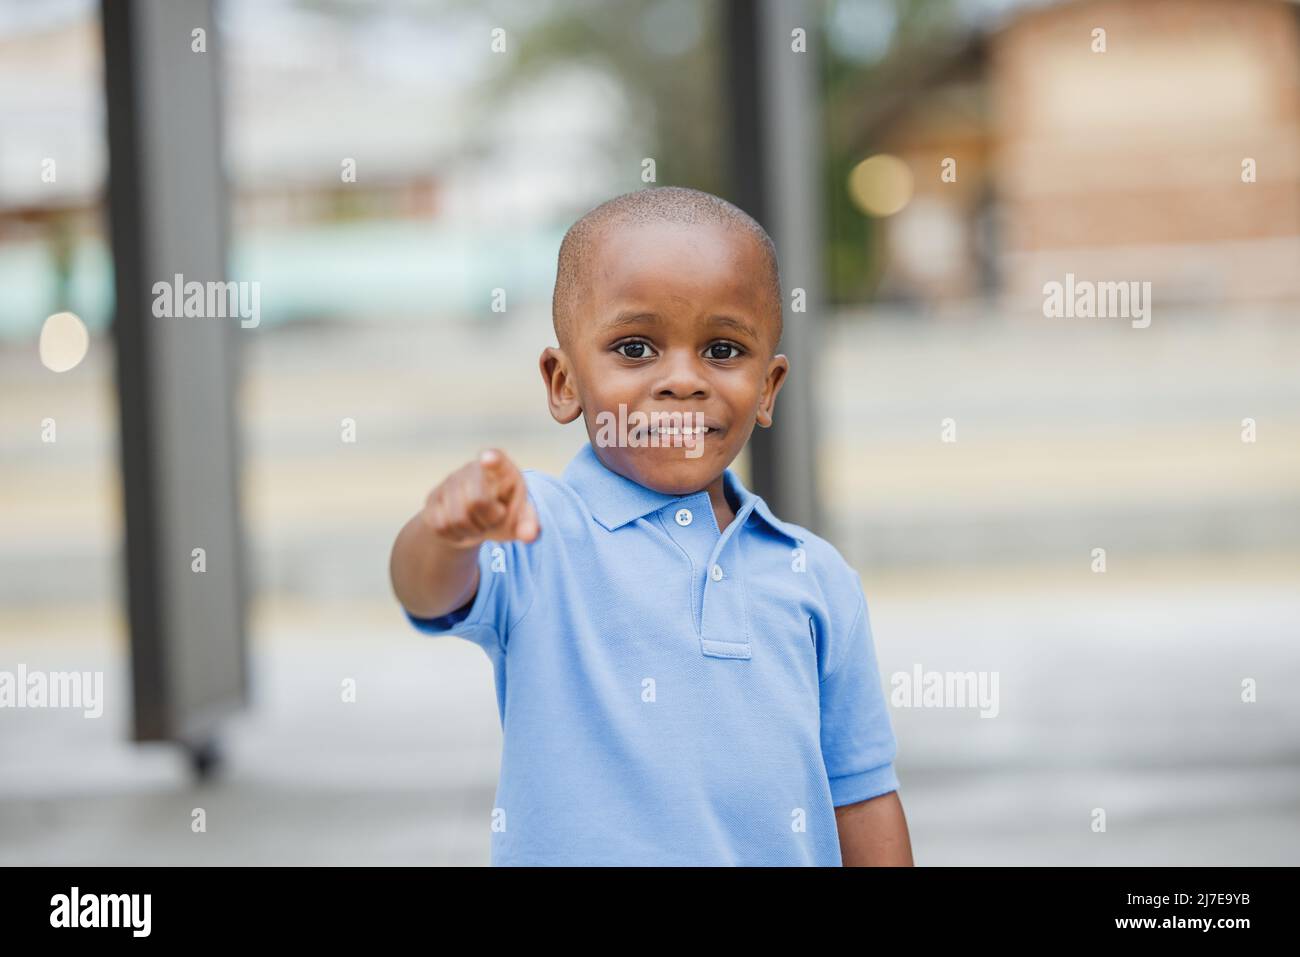 A little boy standing outside and pointing Stock Photo